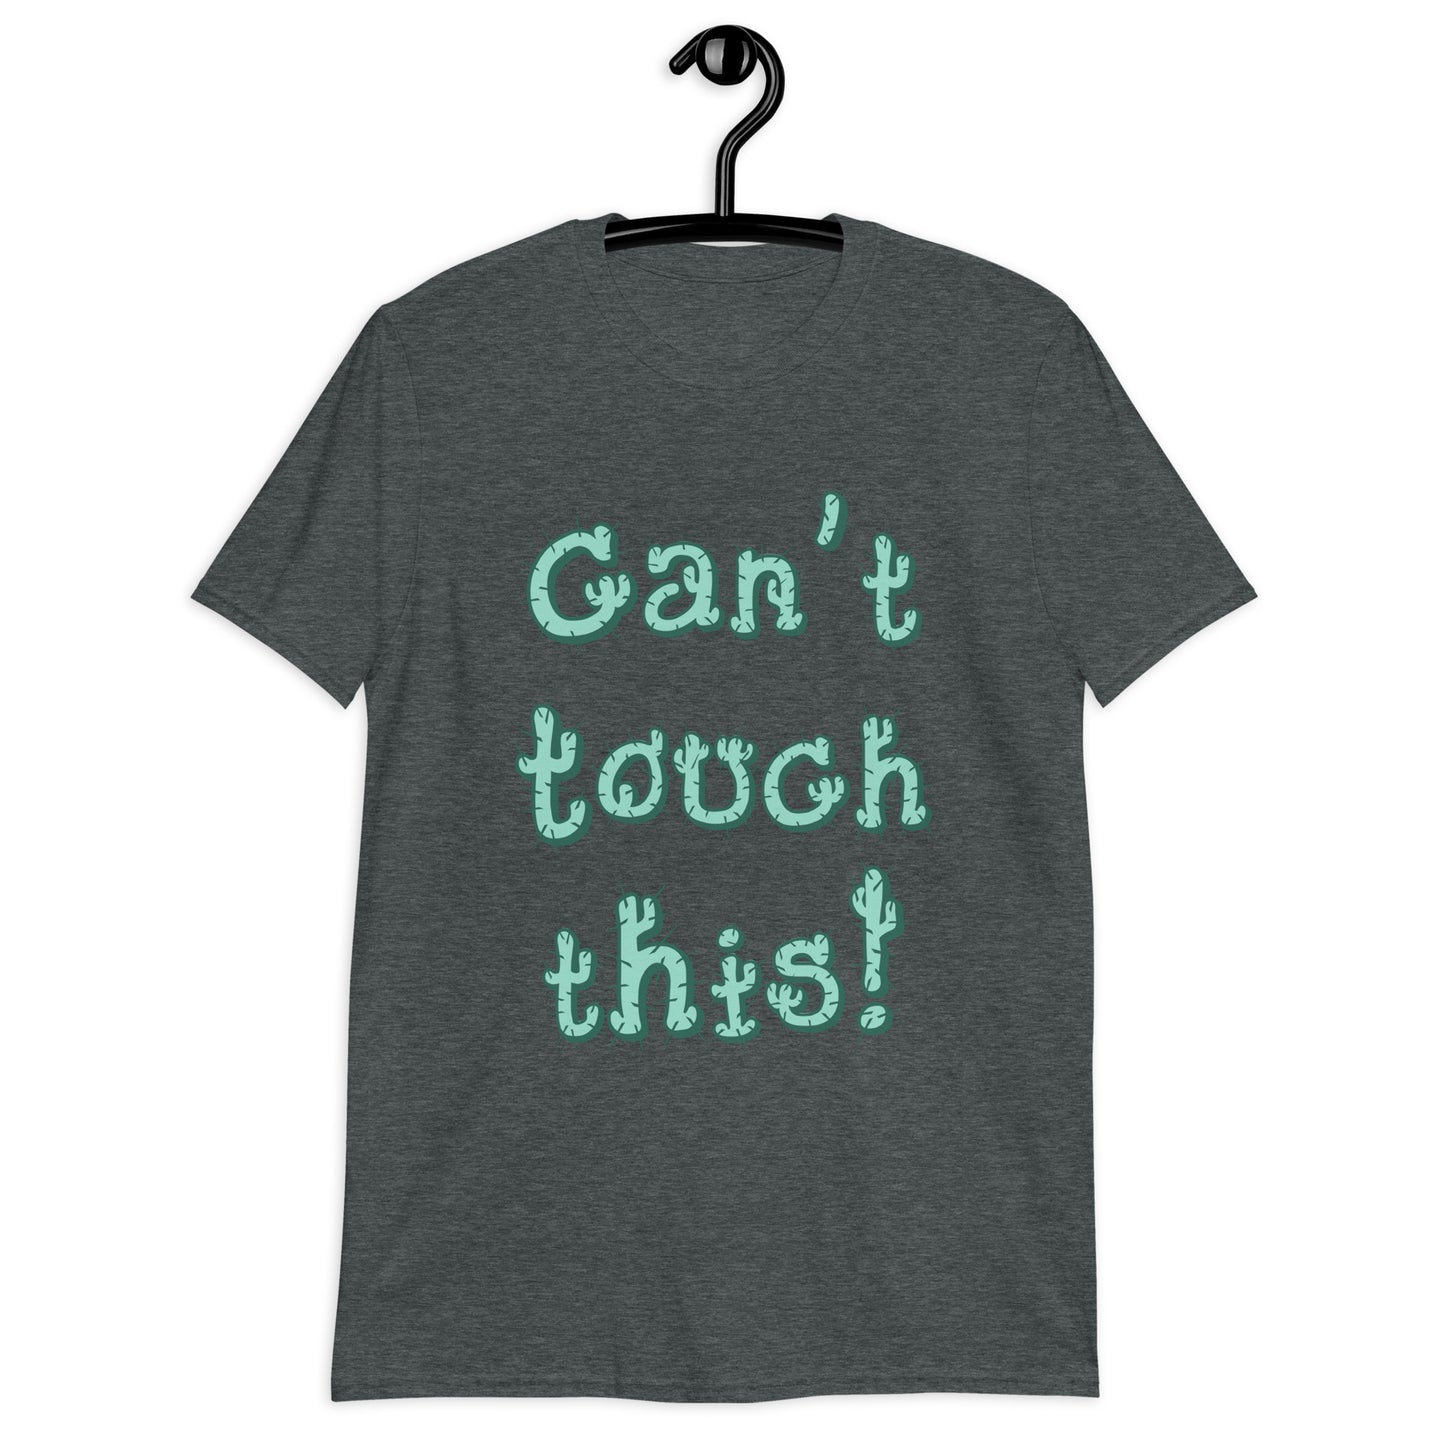 Can't Touch This" Cactus Typography Shirt